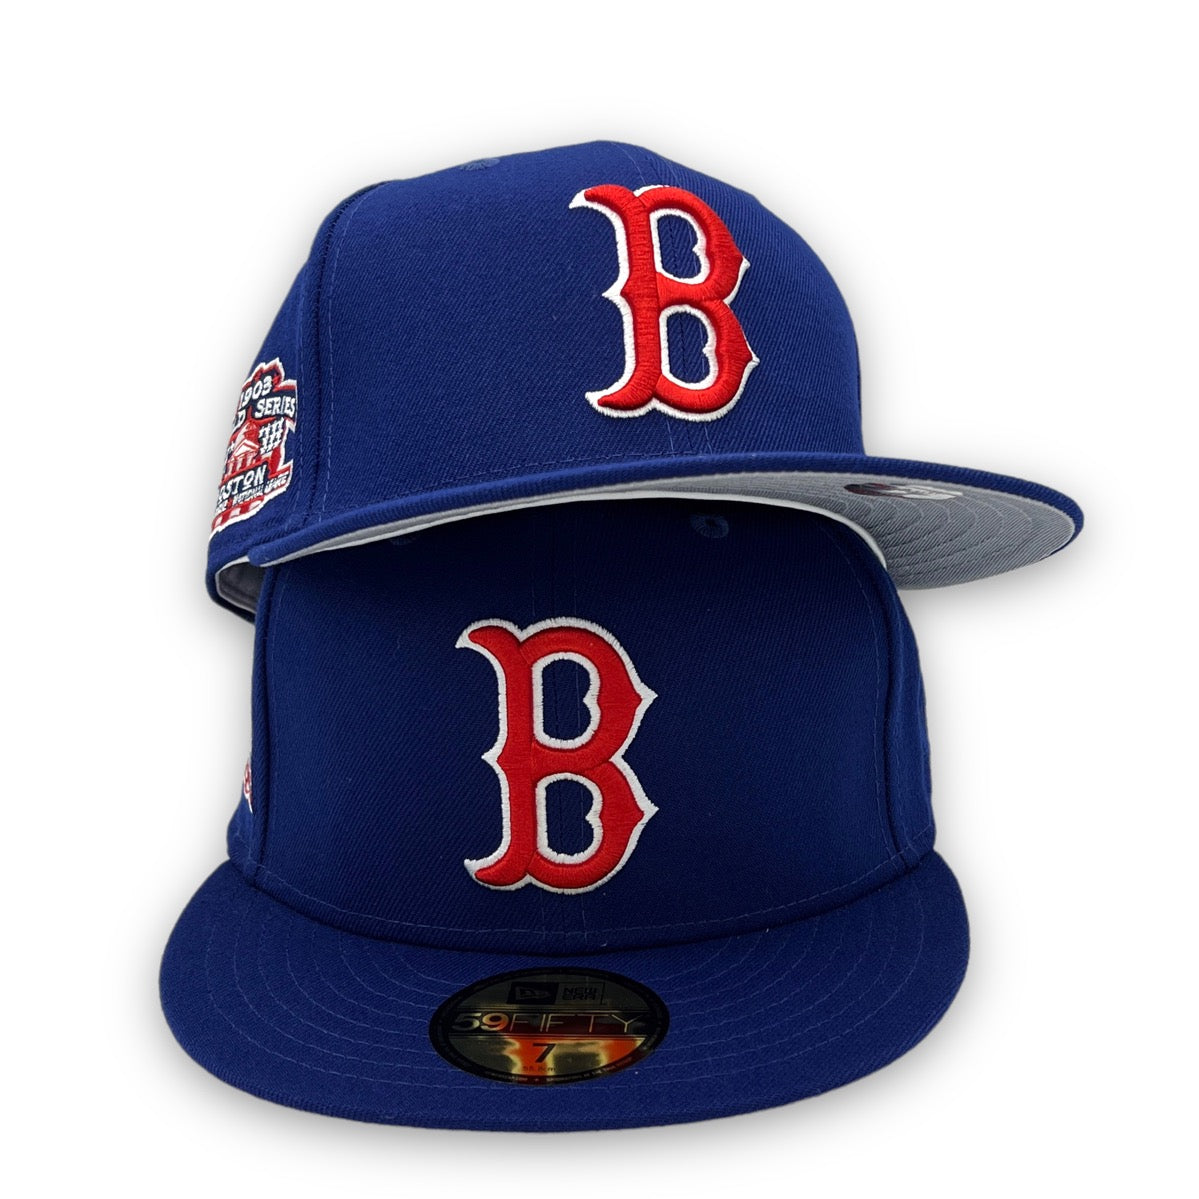 Men's New Era Royal Boston Red Sox White Logo 59FIFTY Fitted Hat